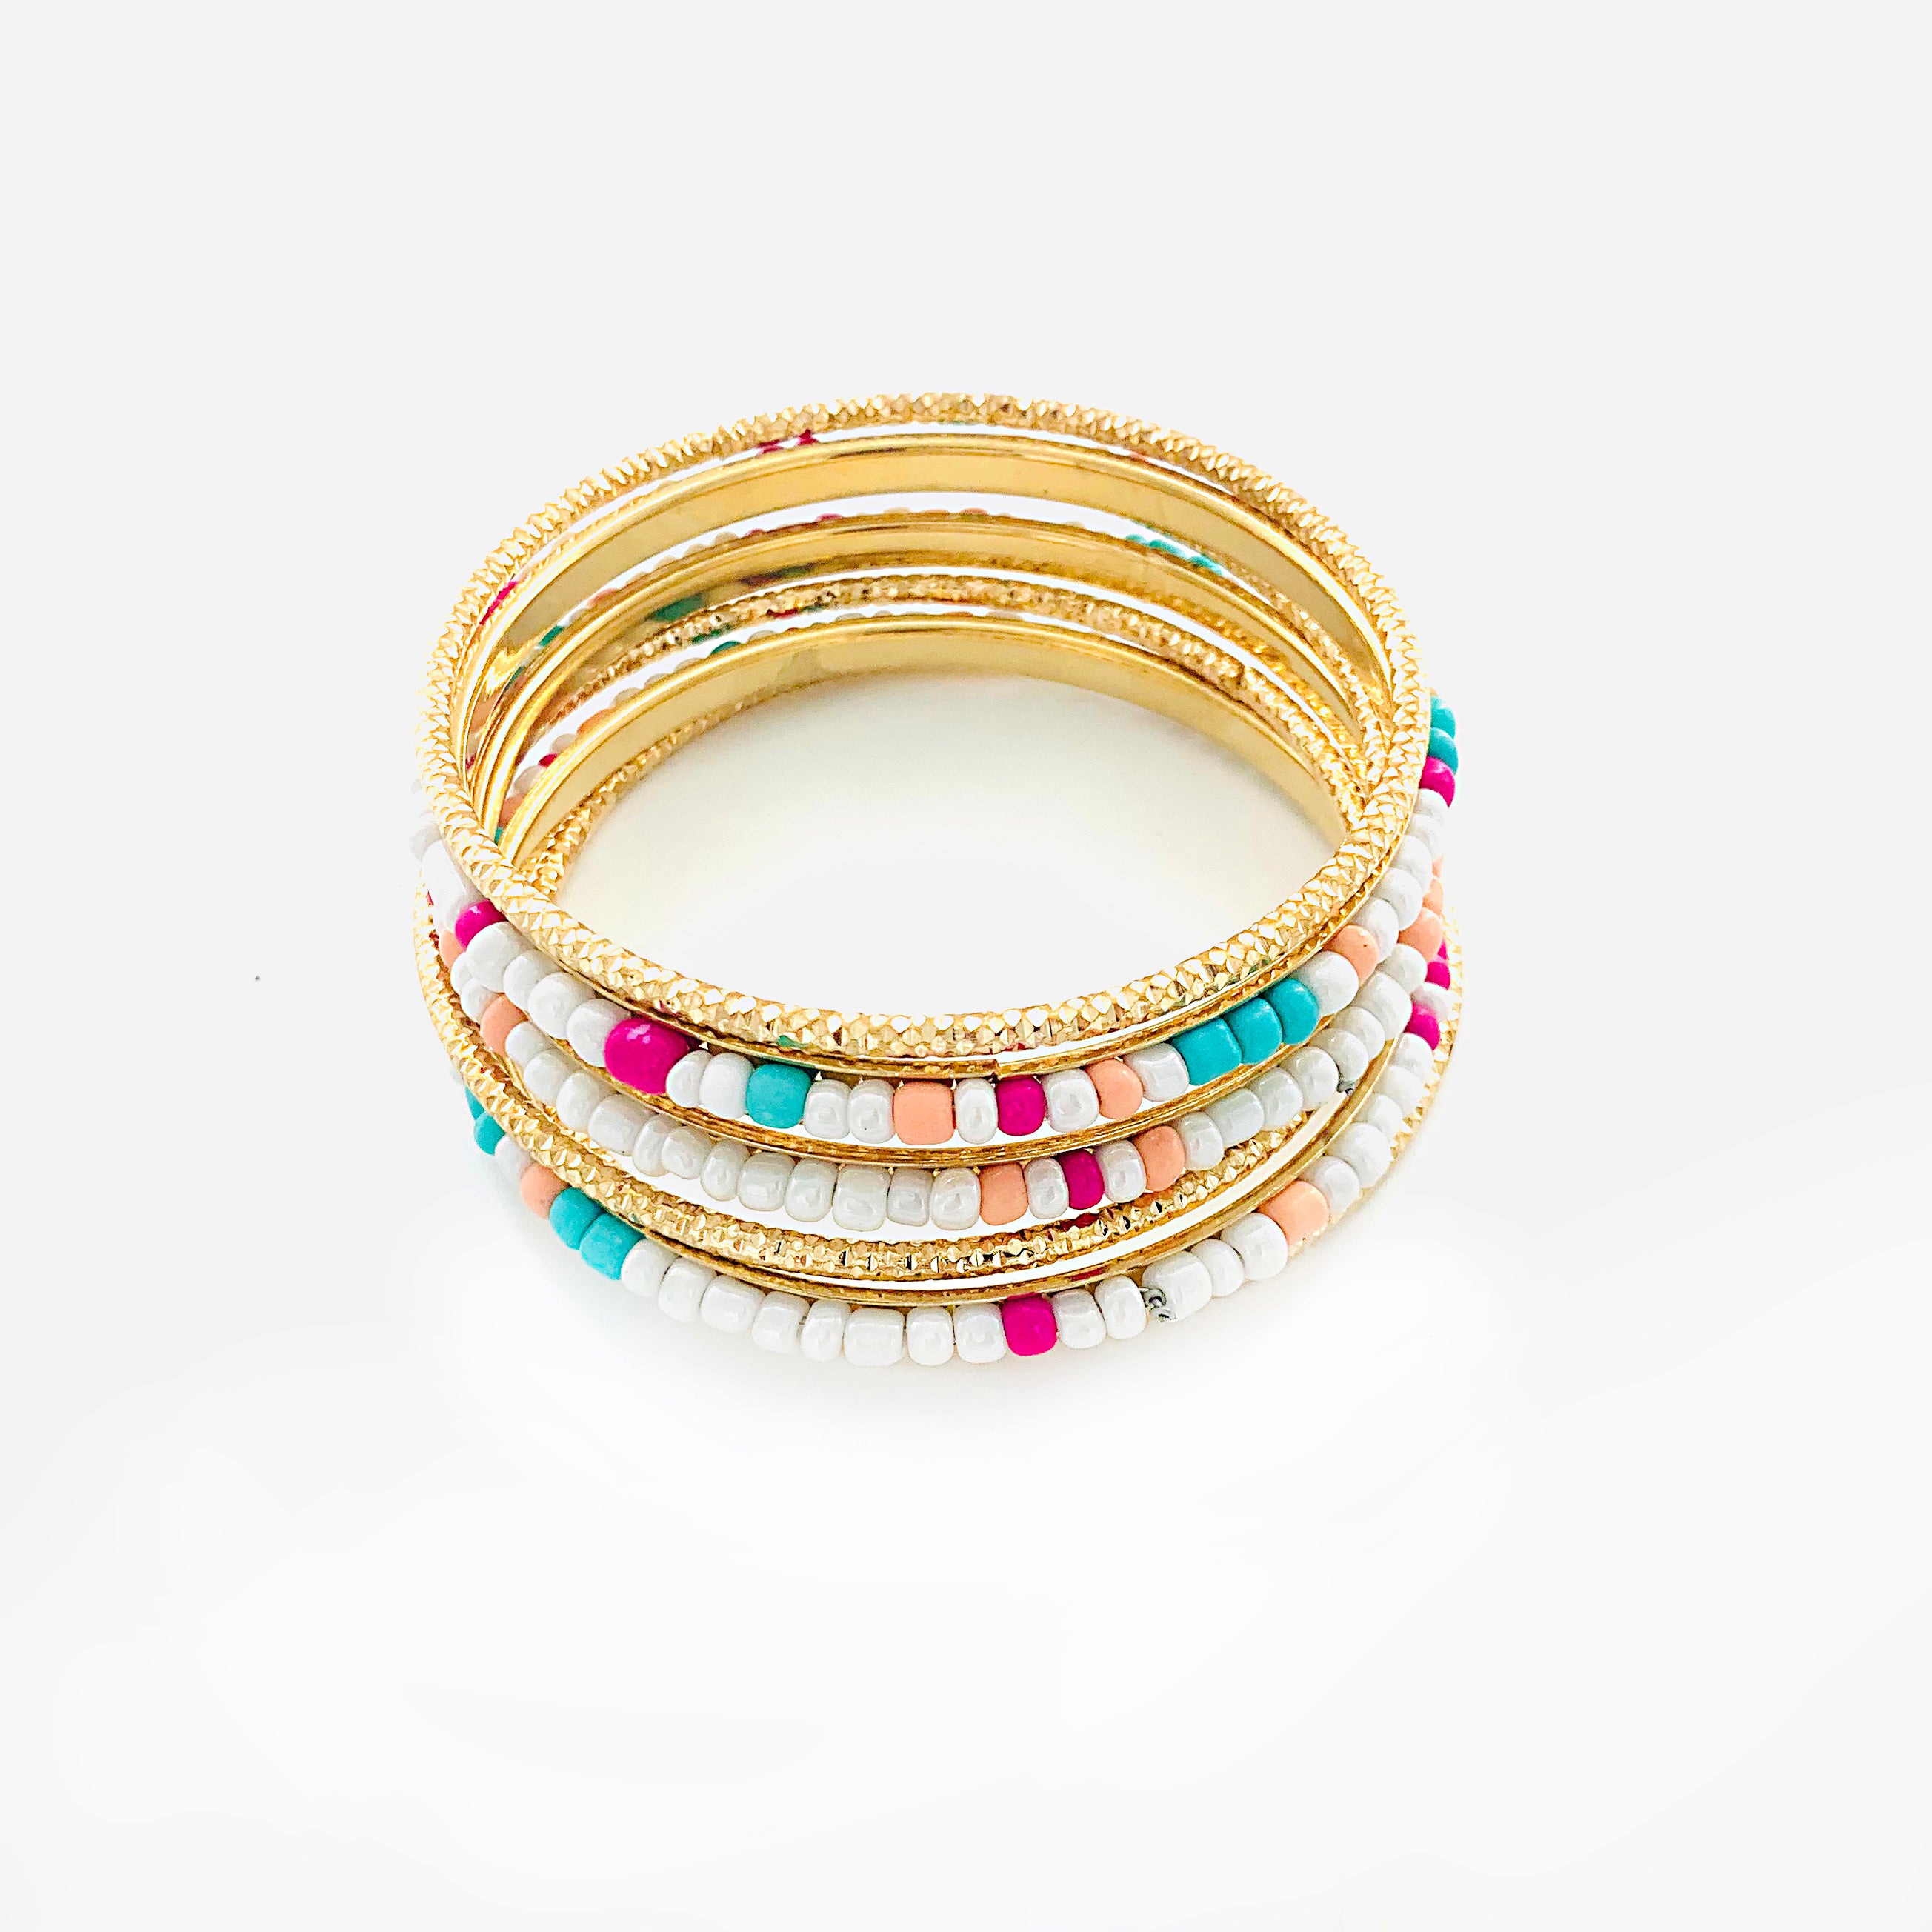 Gold Bangles of Pink, Turquoise, Coral and White Beads